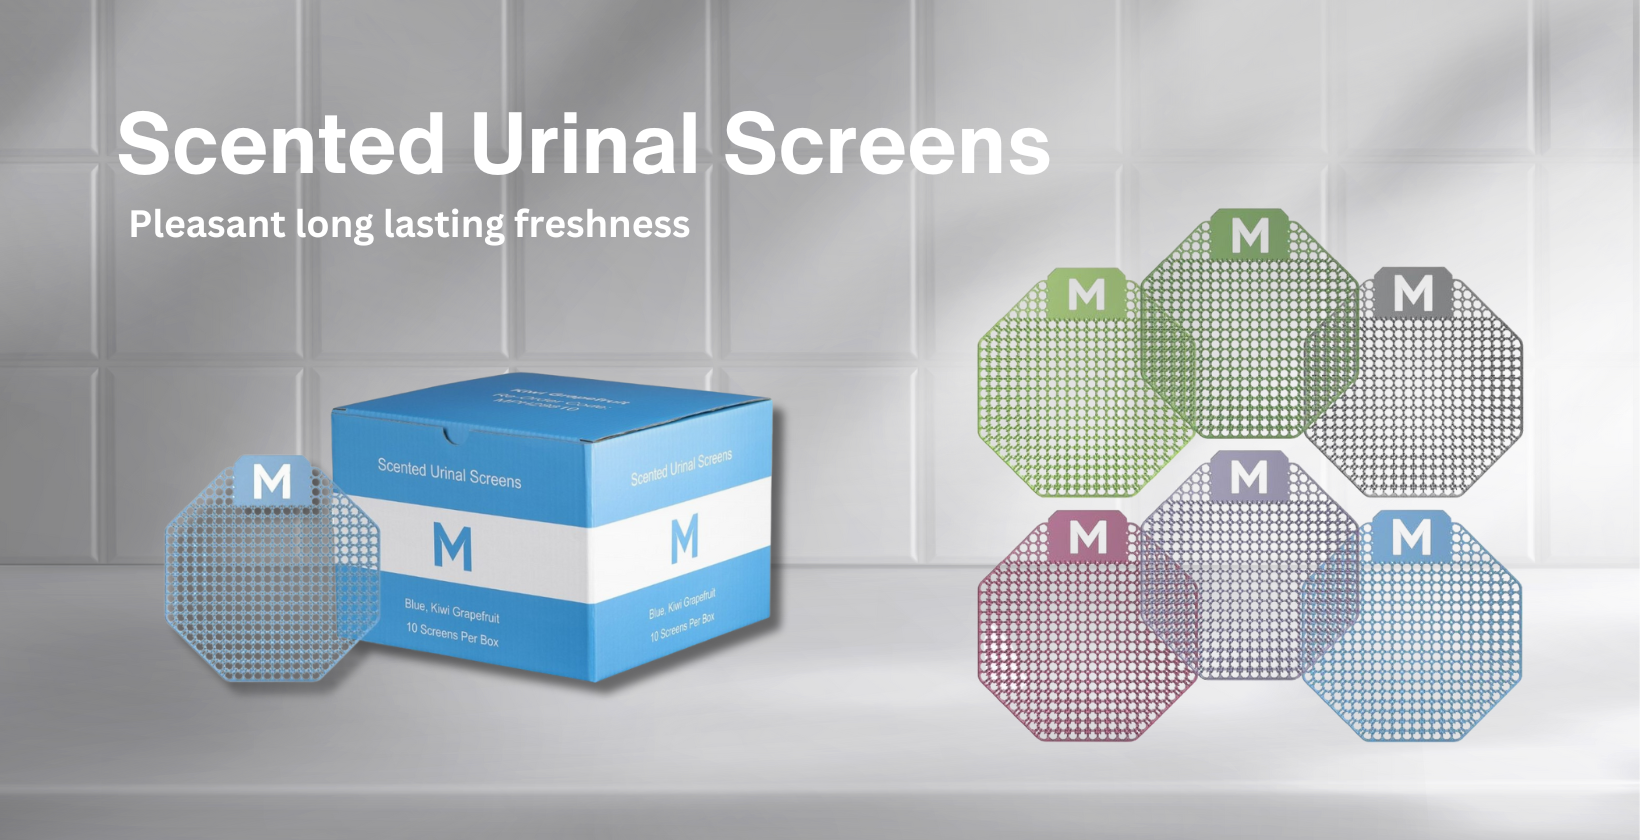 Scented Urinal Screens